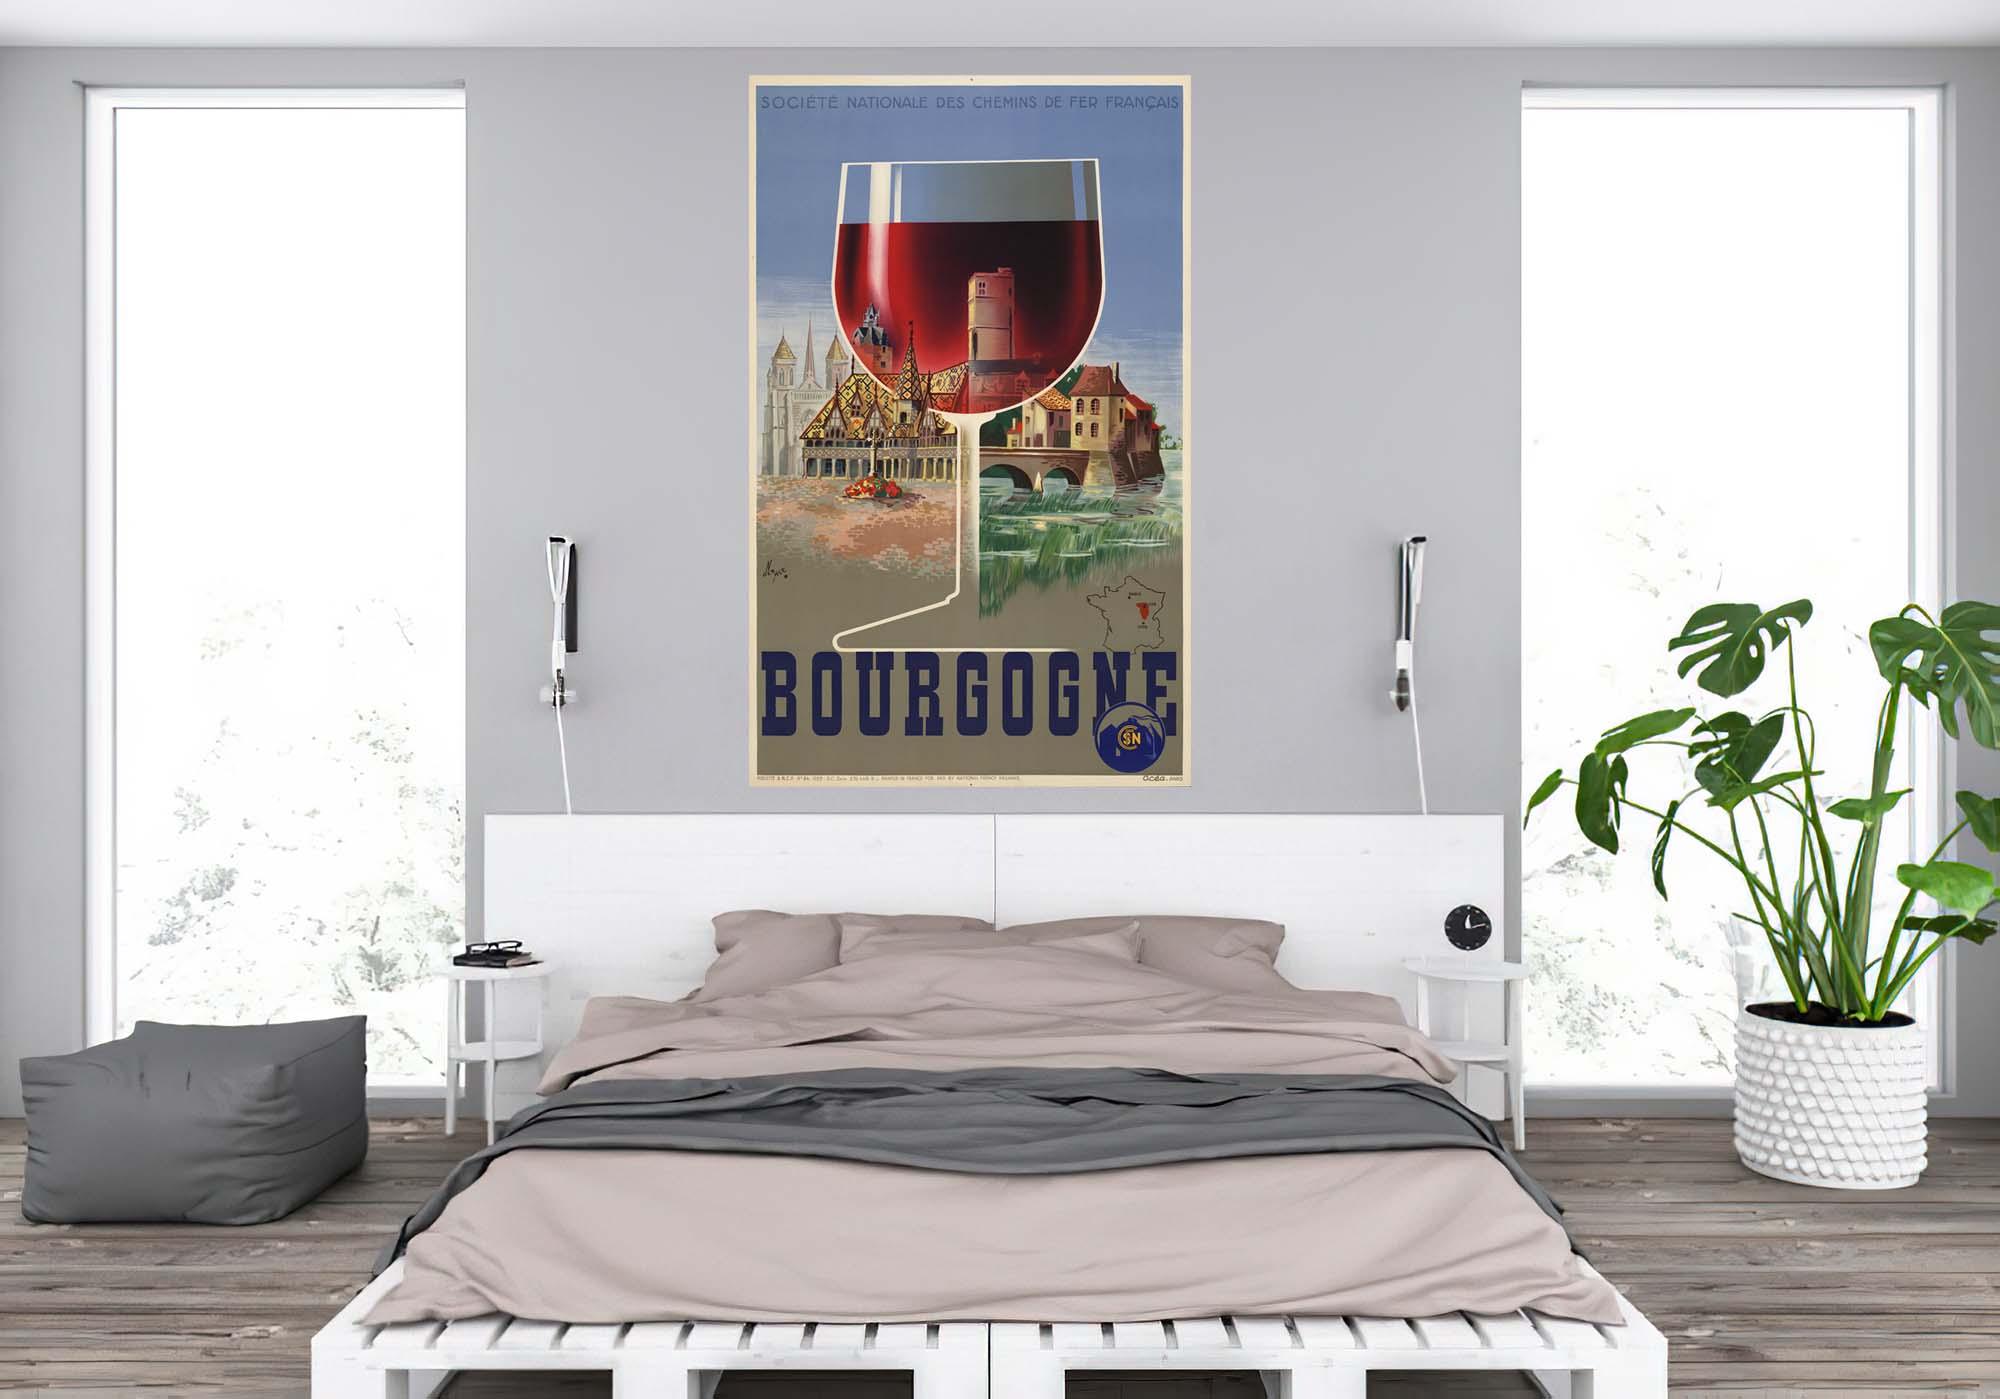 CoolWalls.ca diecut Bourgogne SNCF from 1939 Wine Poster, Wall Decal Sticker Wallpaper, PEEL-N-STICK, removable anytime. Great for a classroom